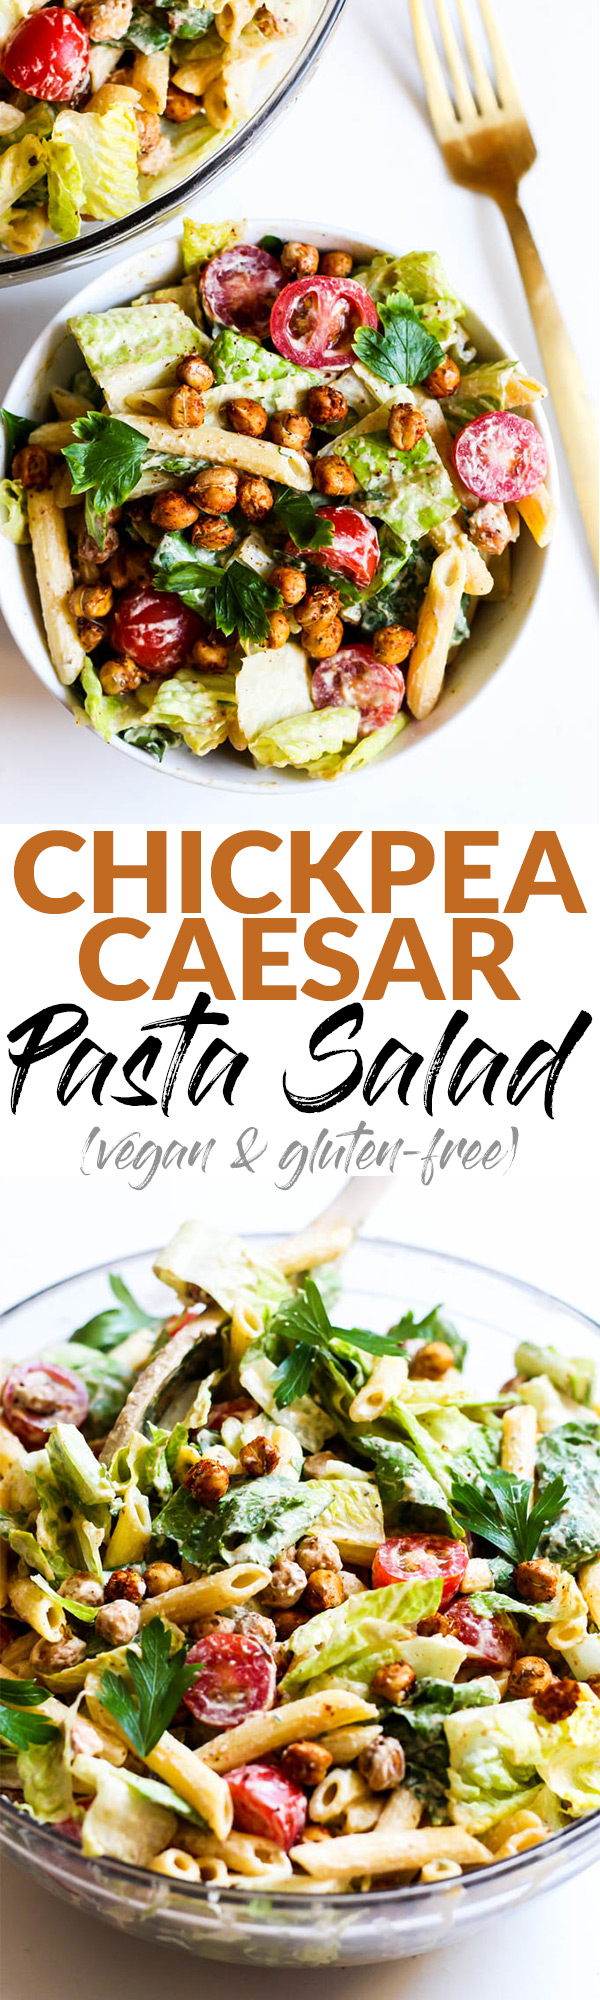 A classic dish with a twist, this vegan Chickpea Caesar Pasta Salad is full of creamy Caesar dressing and crunchy chickpea croutons! A great side or entree. (gluten-free)